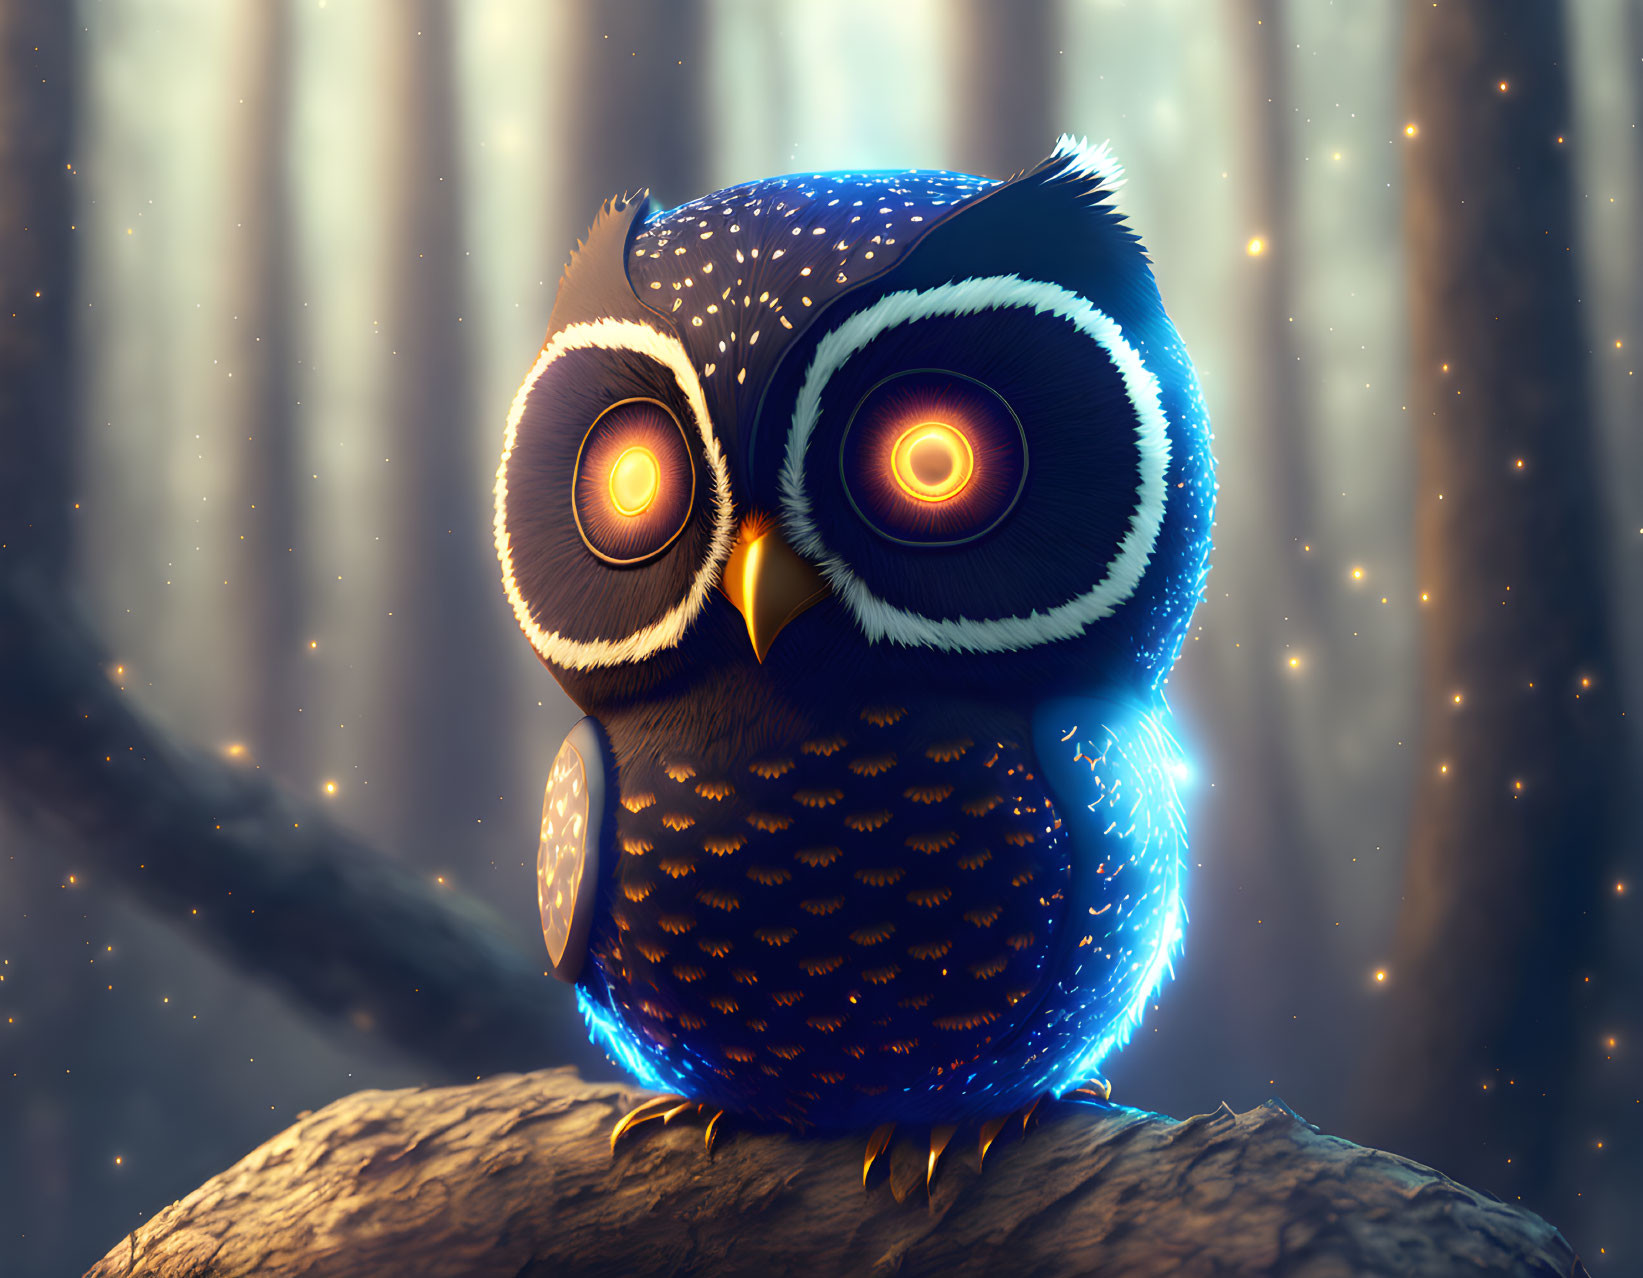 Whimsical glowing-eyed owl on branch in misty forest